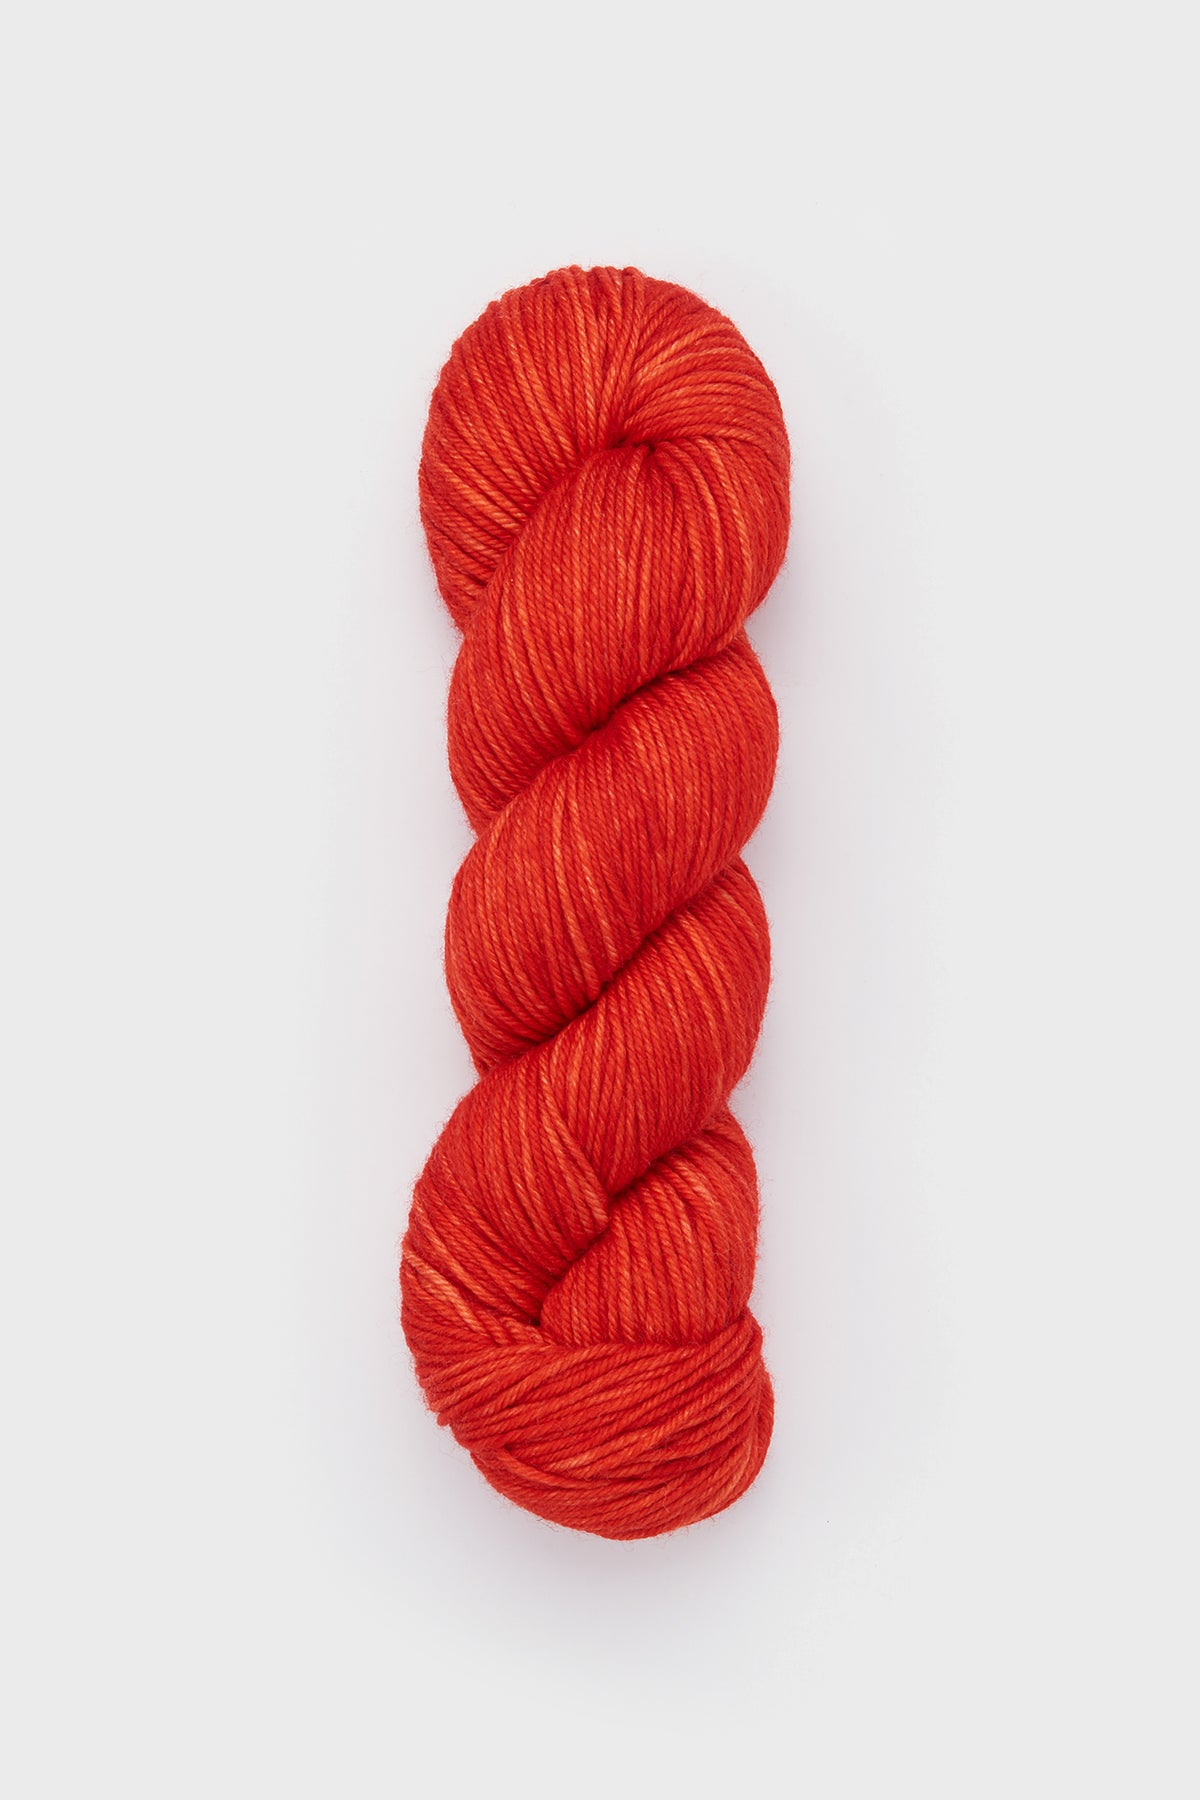 Yarn Skein - Red Flame